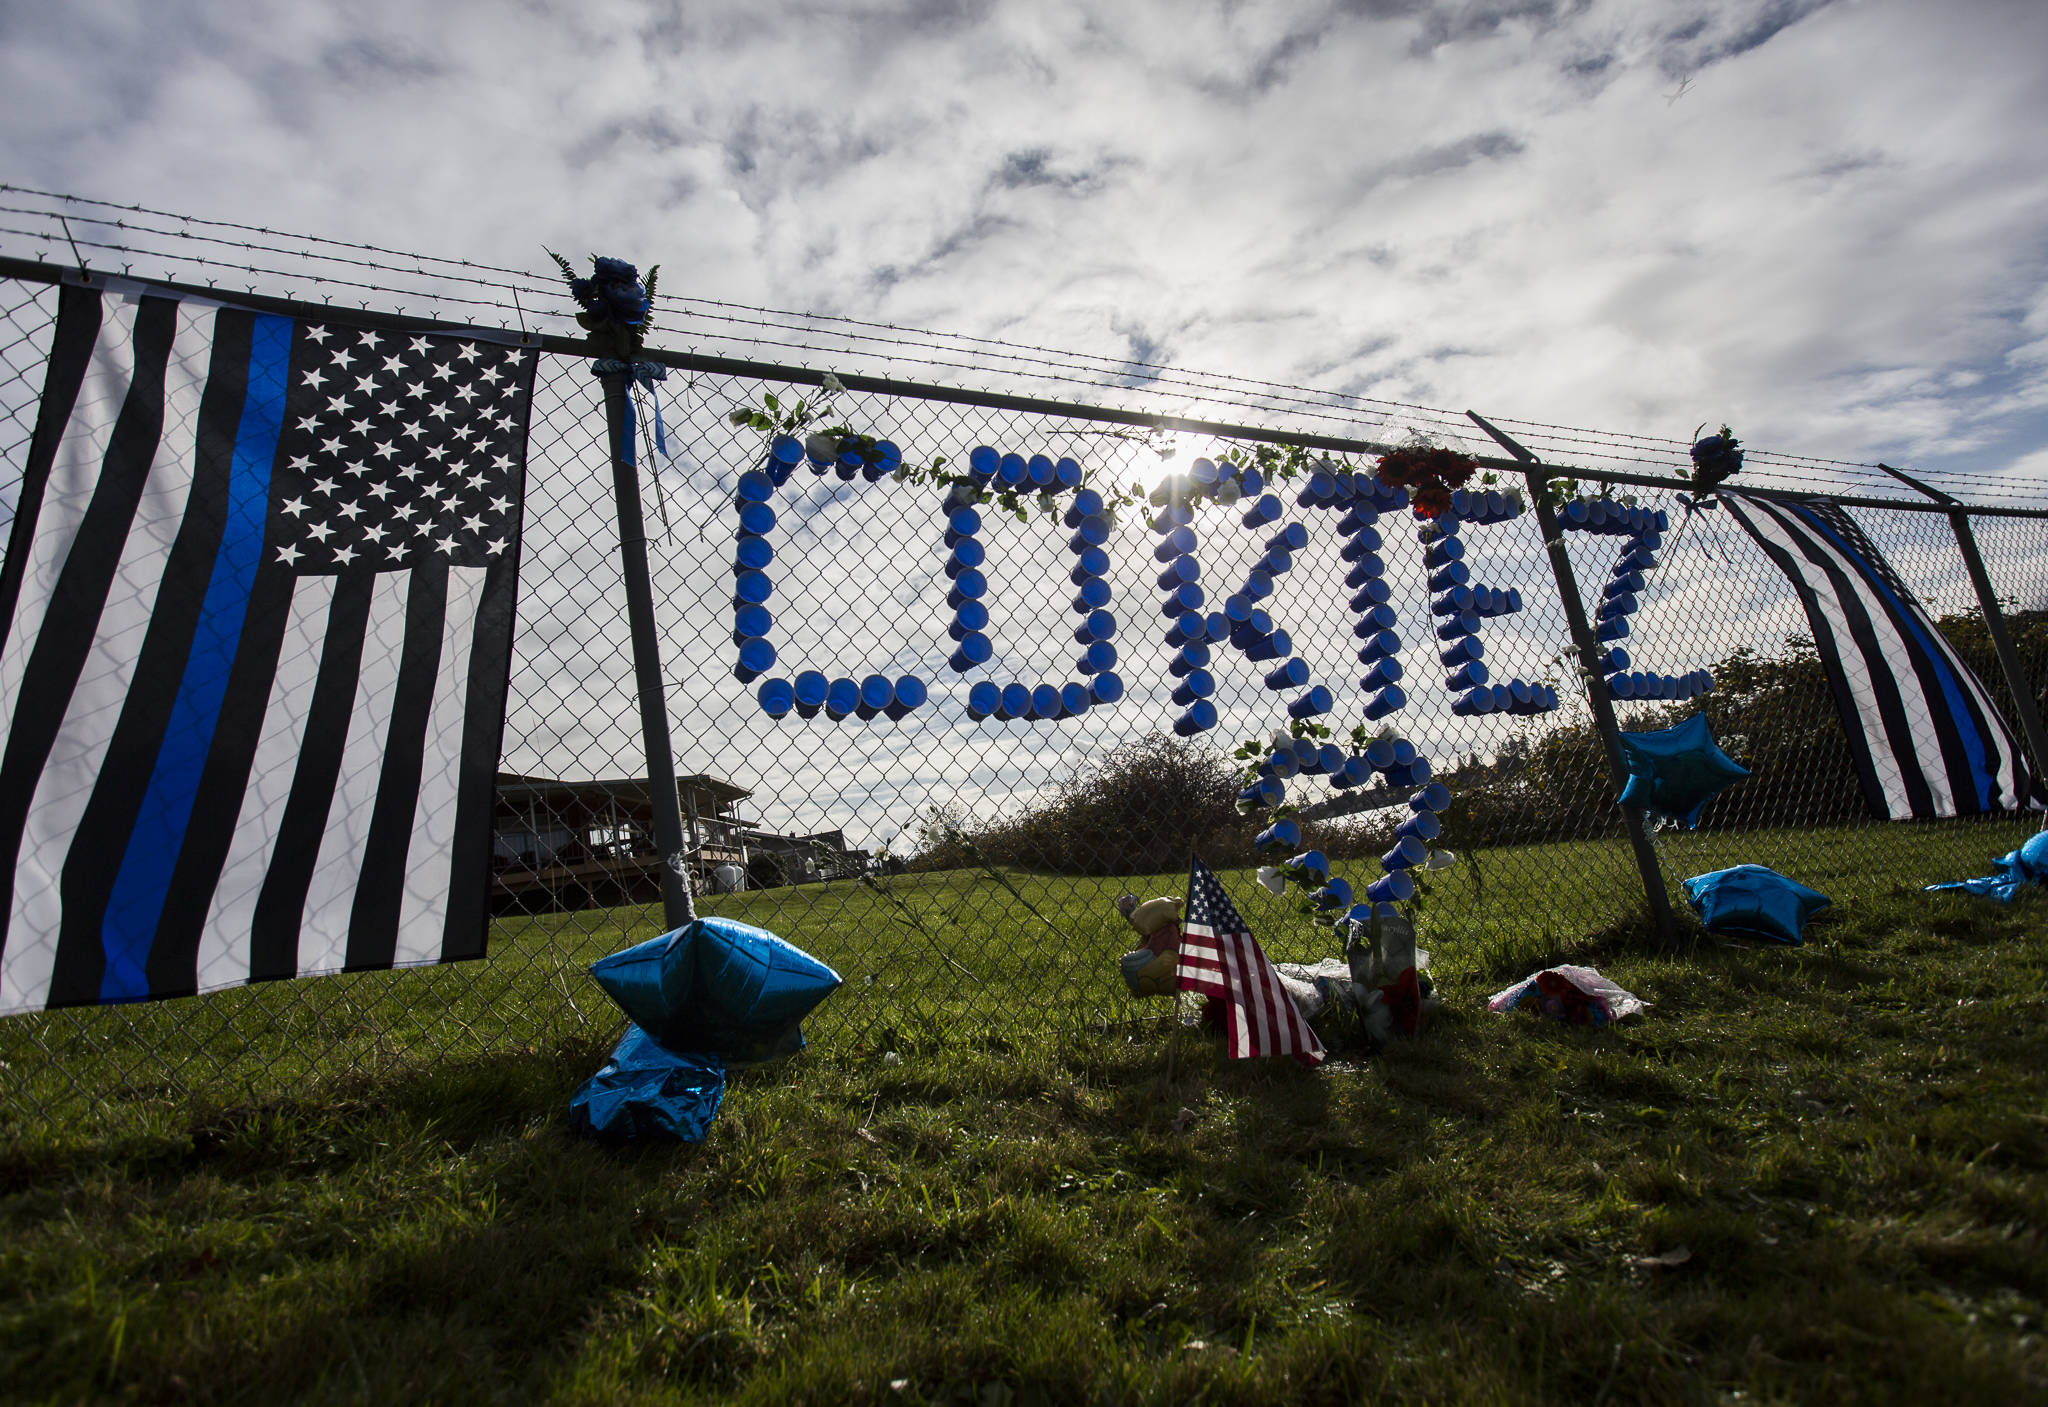 A memorial for Tulalip Tribal Police officer Charlie Cortez at the Tulalip Marina on Wednesday. (Olivia Vanni / The Herald)